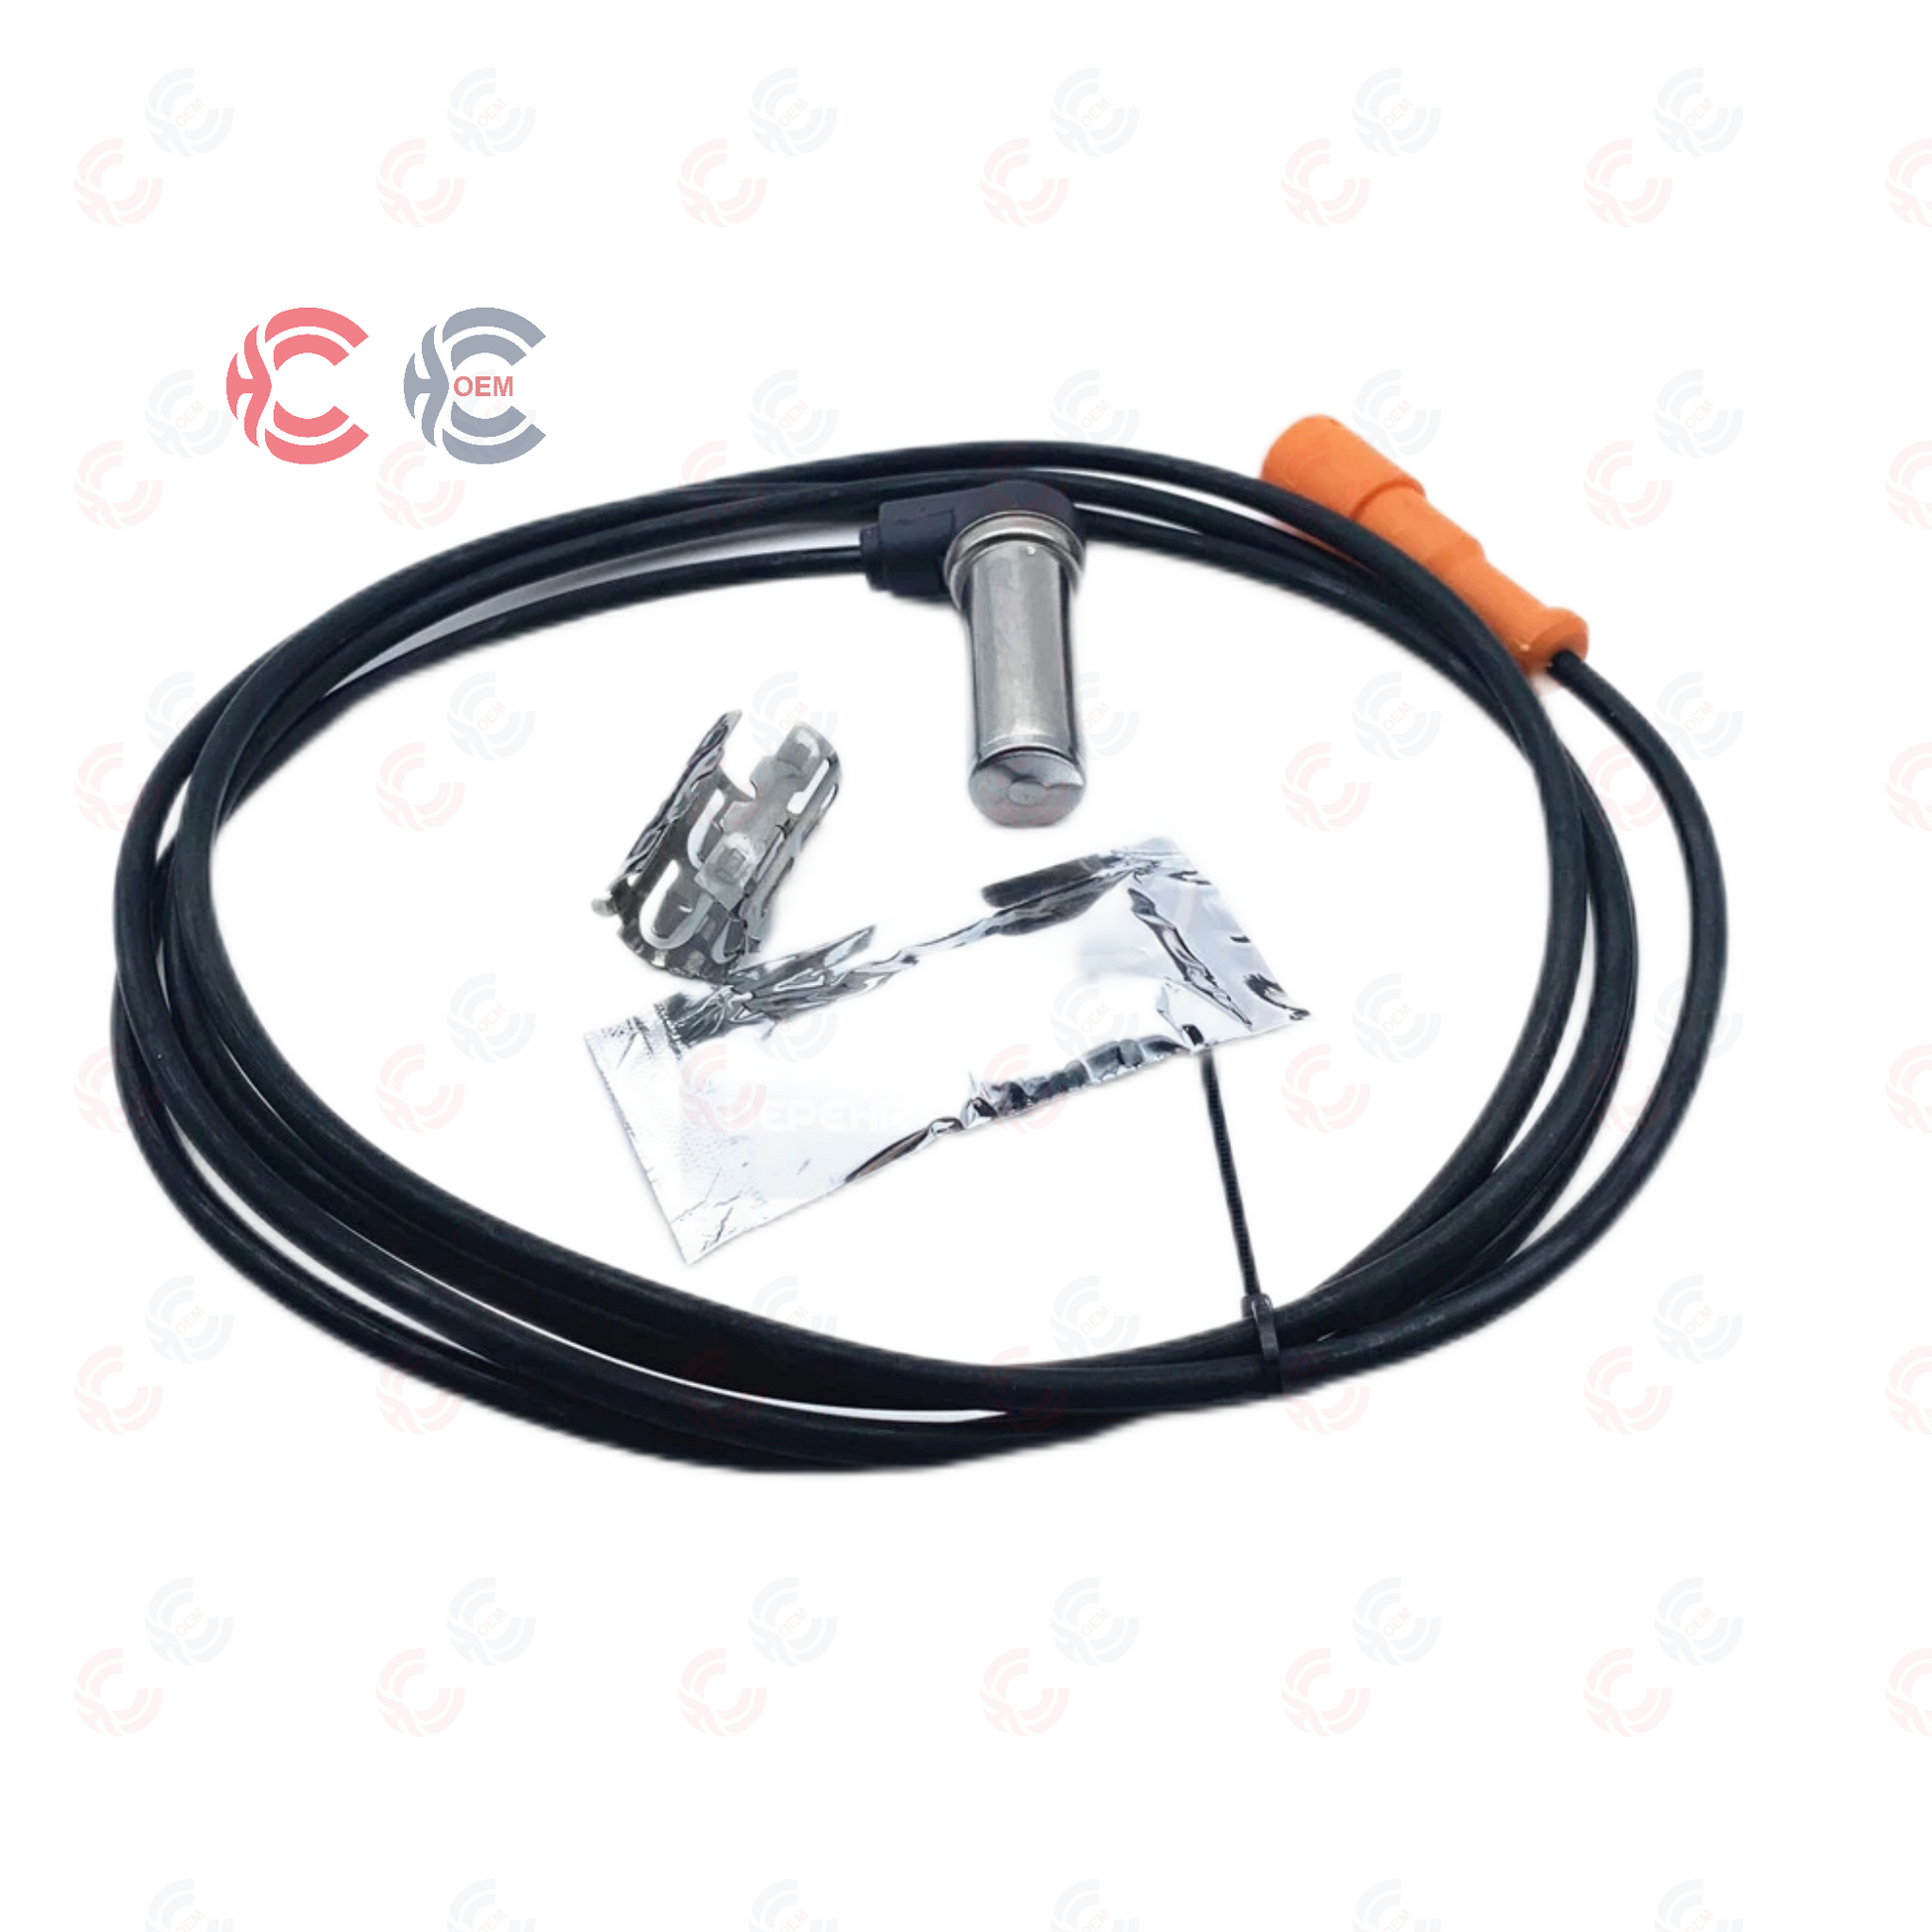 OEM: 1524830 2000mmMaterial: ABS MetalColor: Black SilverOrigin: Made in ChinaWeight: 100gPacking List: 1* Wheel Speed Sensor More ServiceWe can provide OEM Manufacturing serviceWe can Be your one-step solution for Auto PartsWe can provide technical scheme for you Feel Free to Contact Us, We will get back to you as soon as possible.